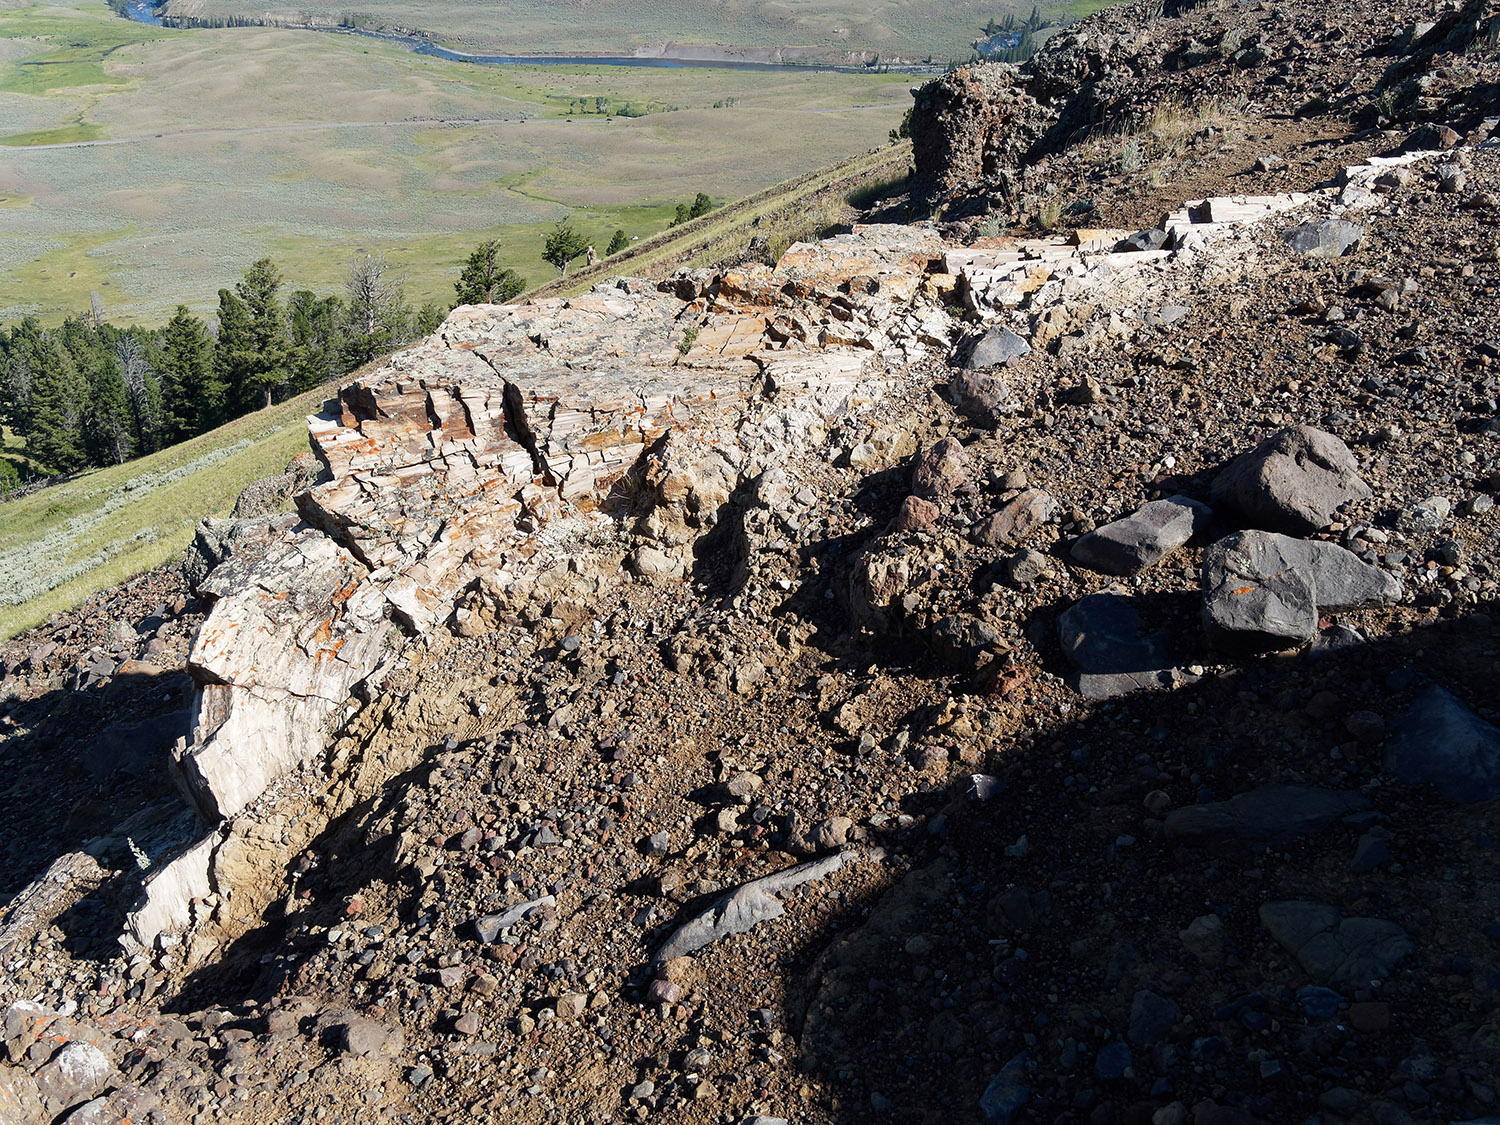 Part of a petrified tree partially uncovered in the volcanic conglomerate from the Eocene epoch.  The Lamar River is in the glacier-carved valley below.